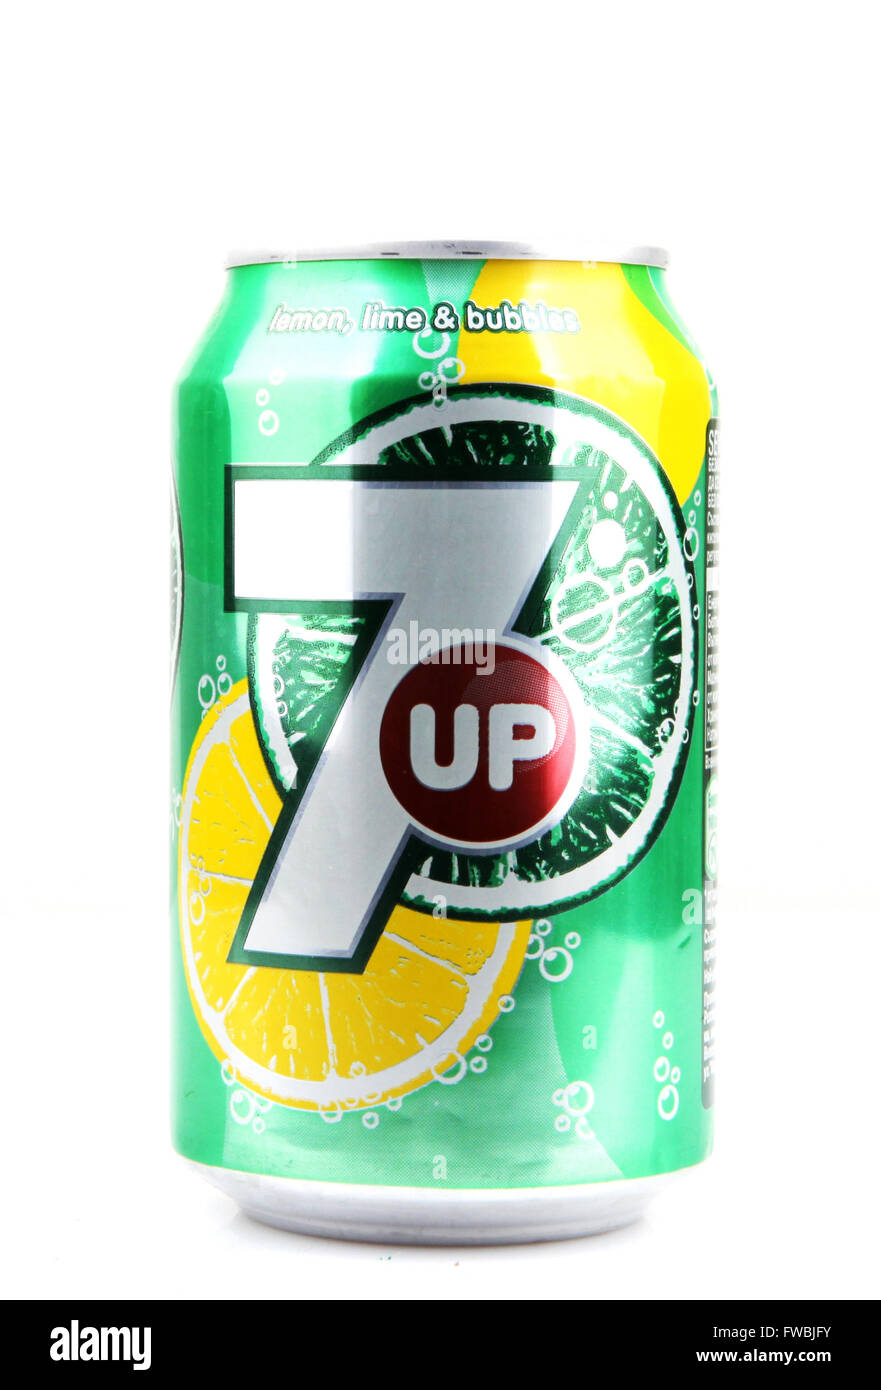 AYTOS, BULGARIA - APRIL 03, 2016: 7 Up isolated on white background. 7 Up is a brand of lemon-lime flavored, non-caffeinated sof Stock Photo